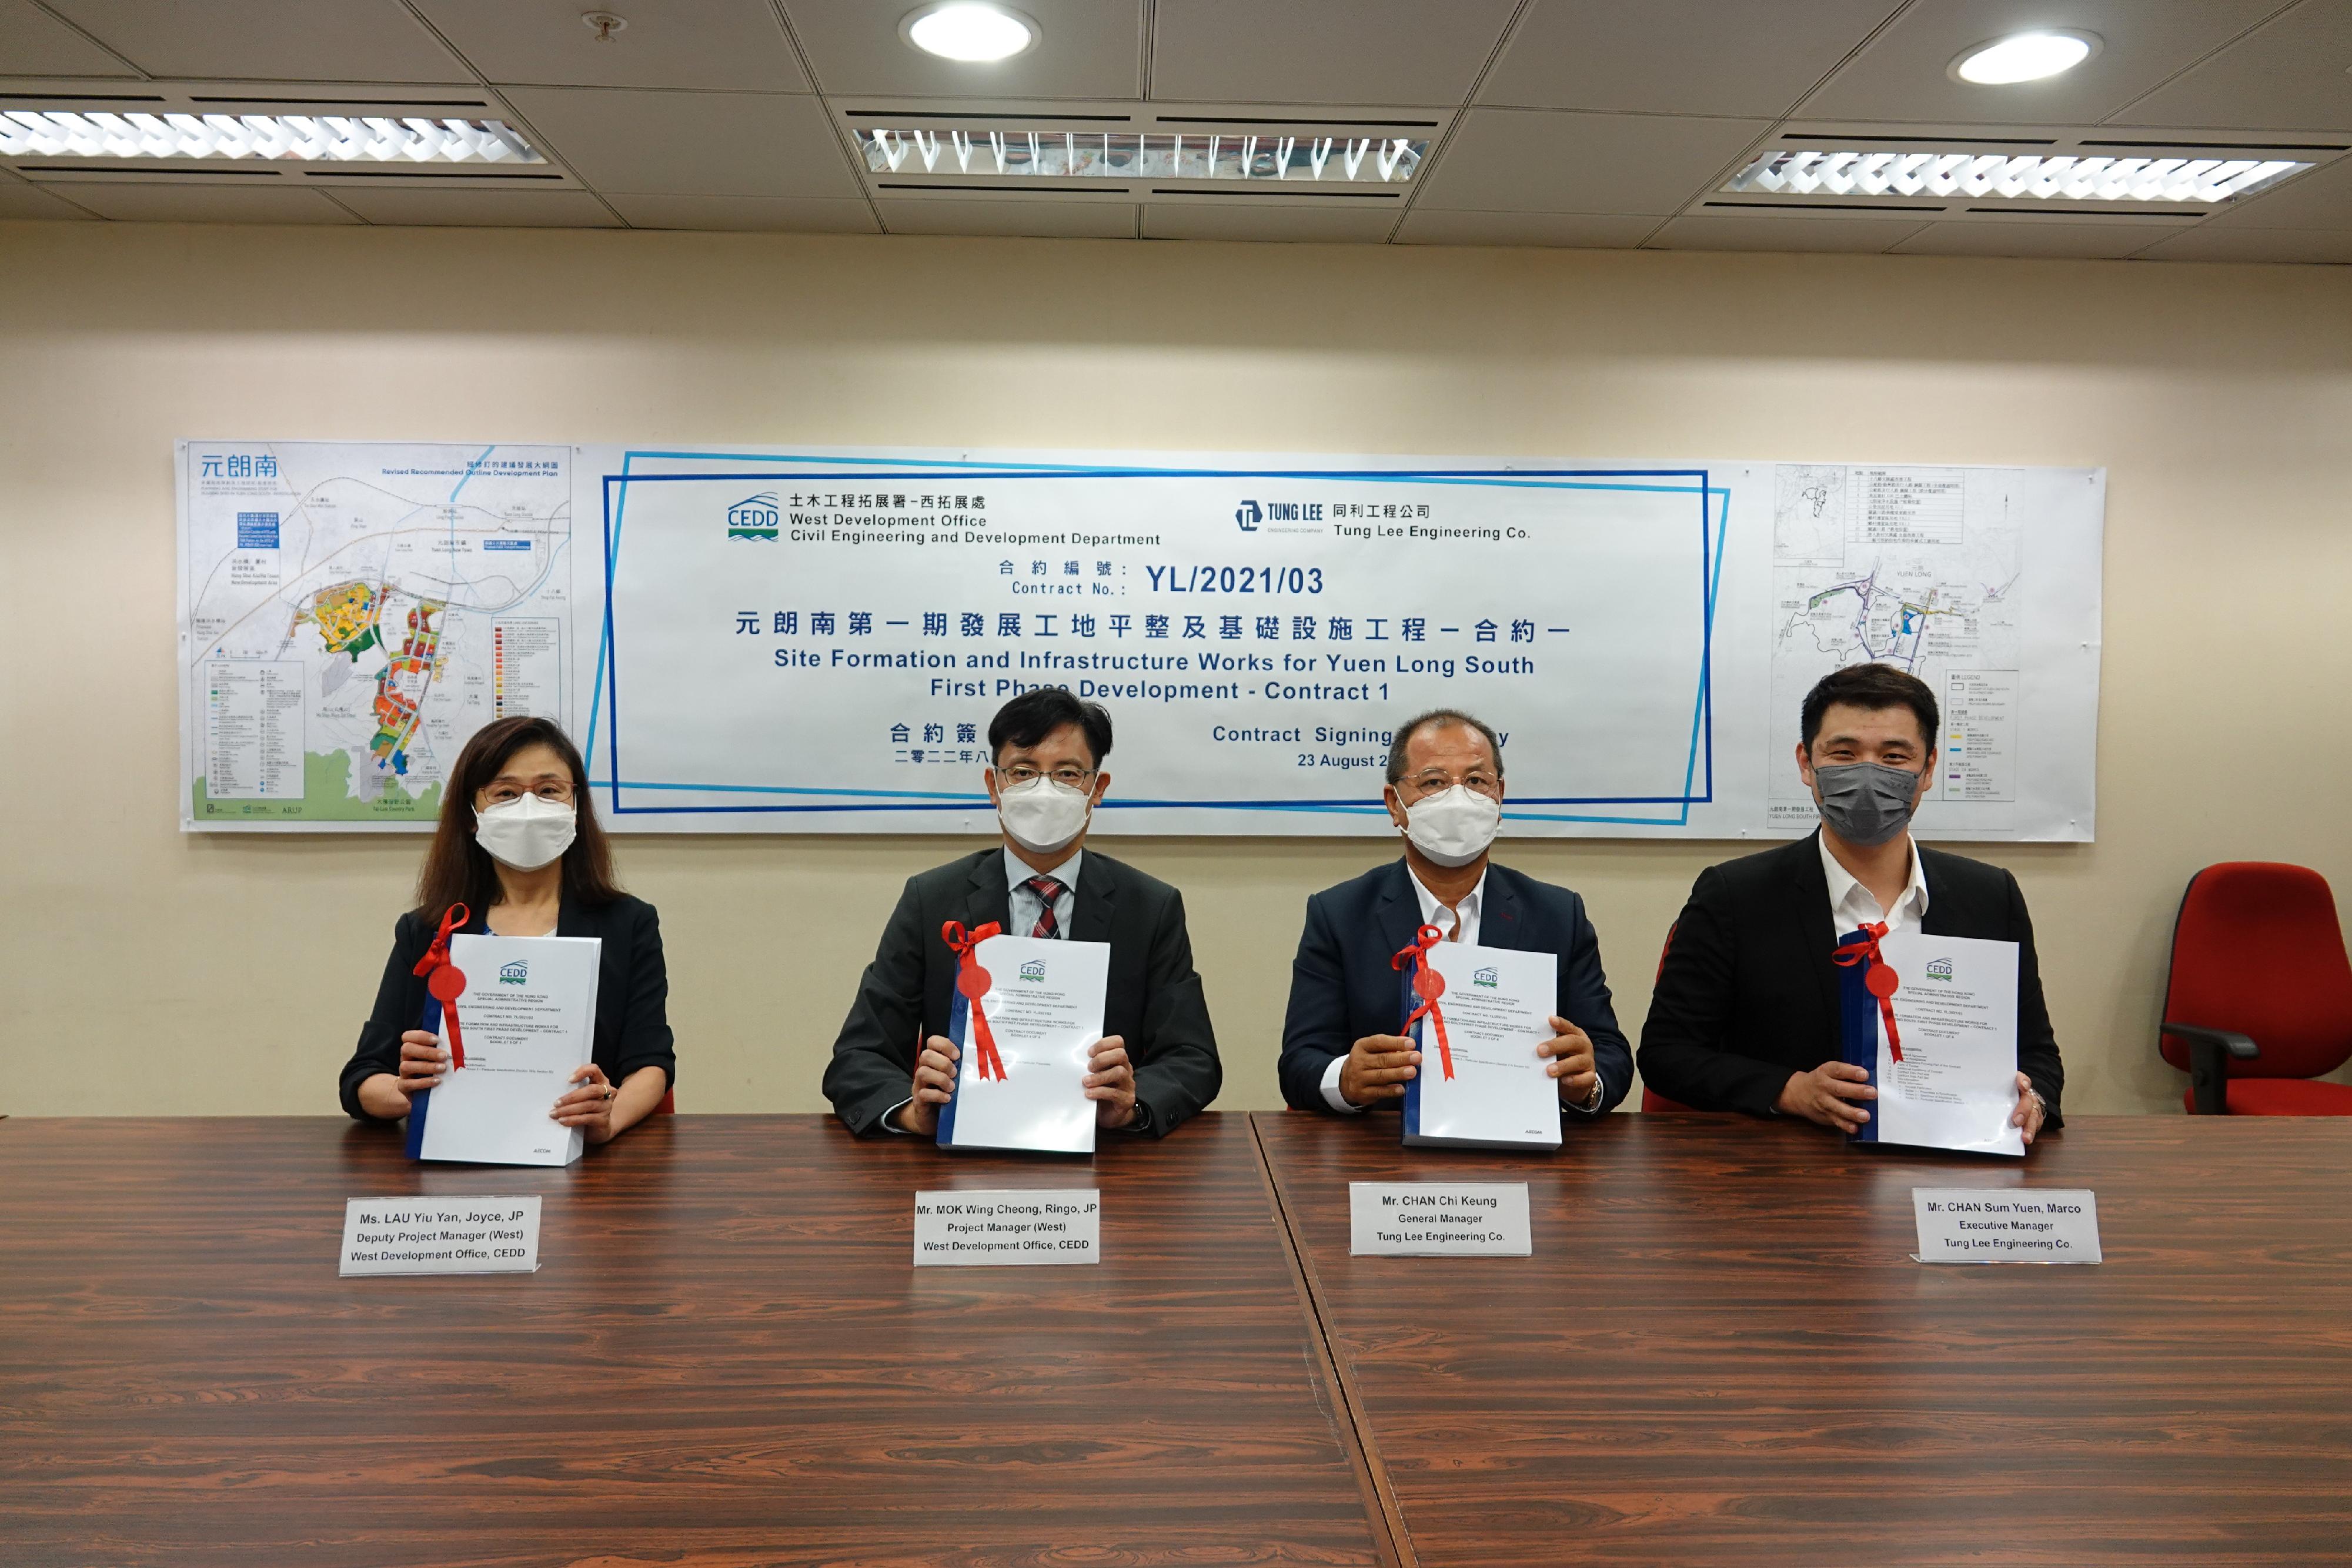 The Project Manager of the West Development Office, Civil Engineering and Development Department, Mr Ringo Mok (second left), today (August 23) signed a contract with representatives of Tung Lee Engineering Co to commence Yuen Long South First Phase Development site formation and infrastructure works.